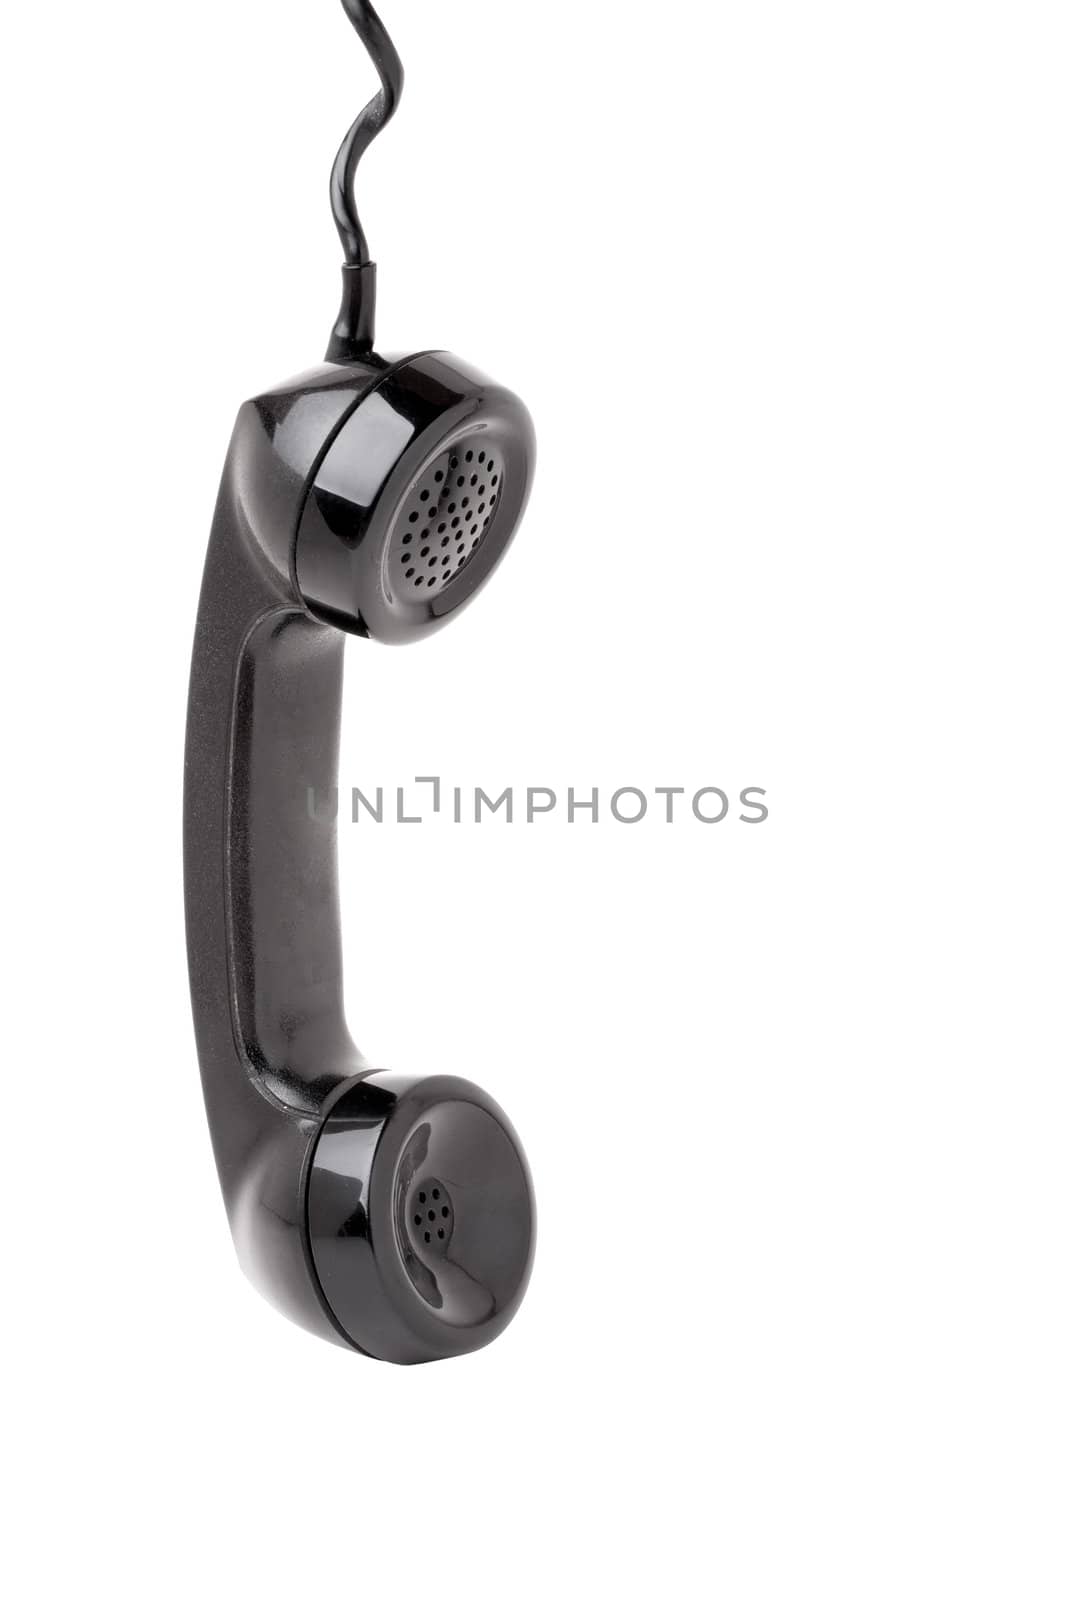 Close up of an old vintage phone handset hanging by the chord isolated over a white background.